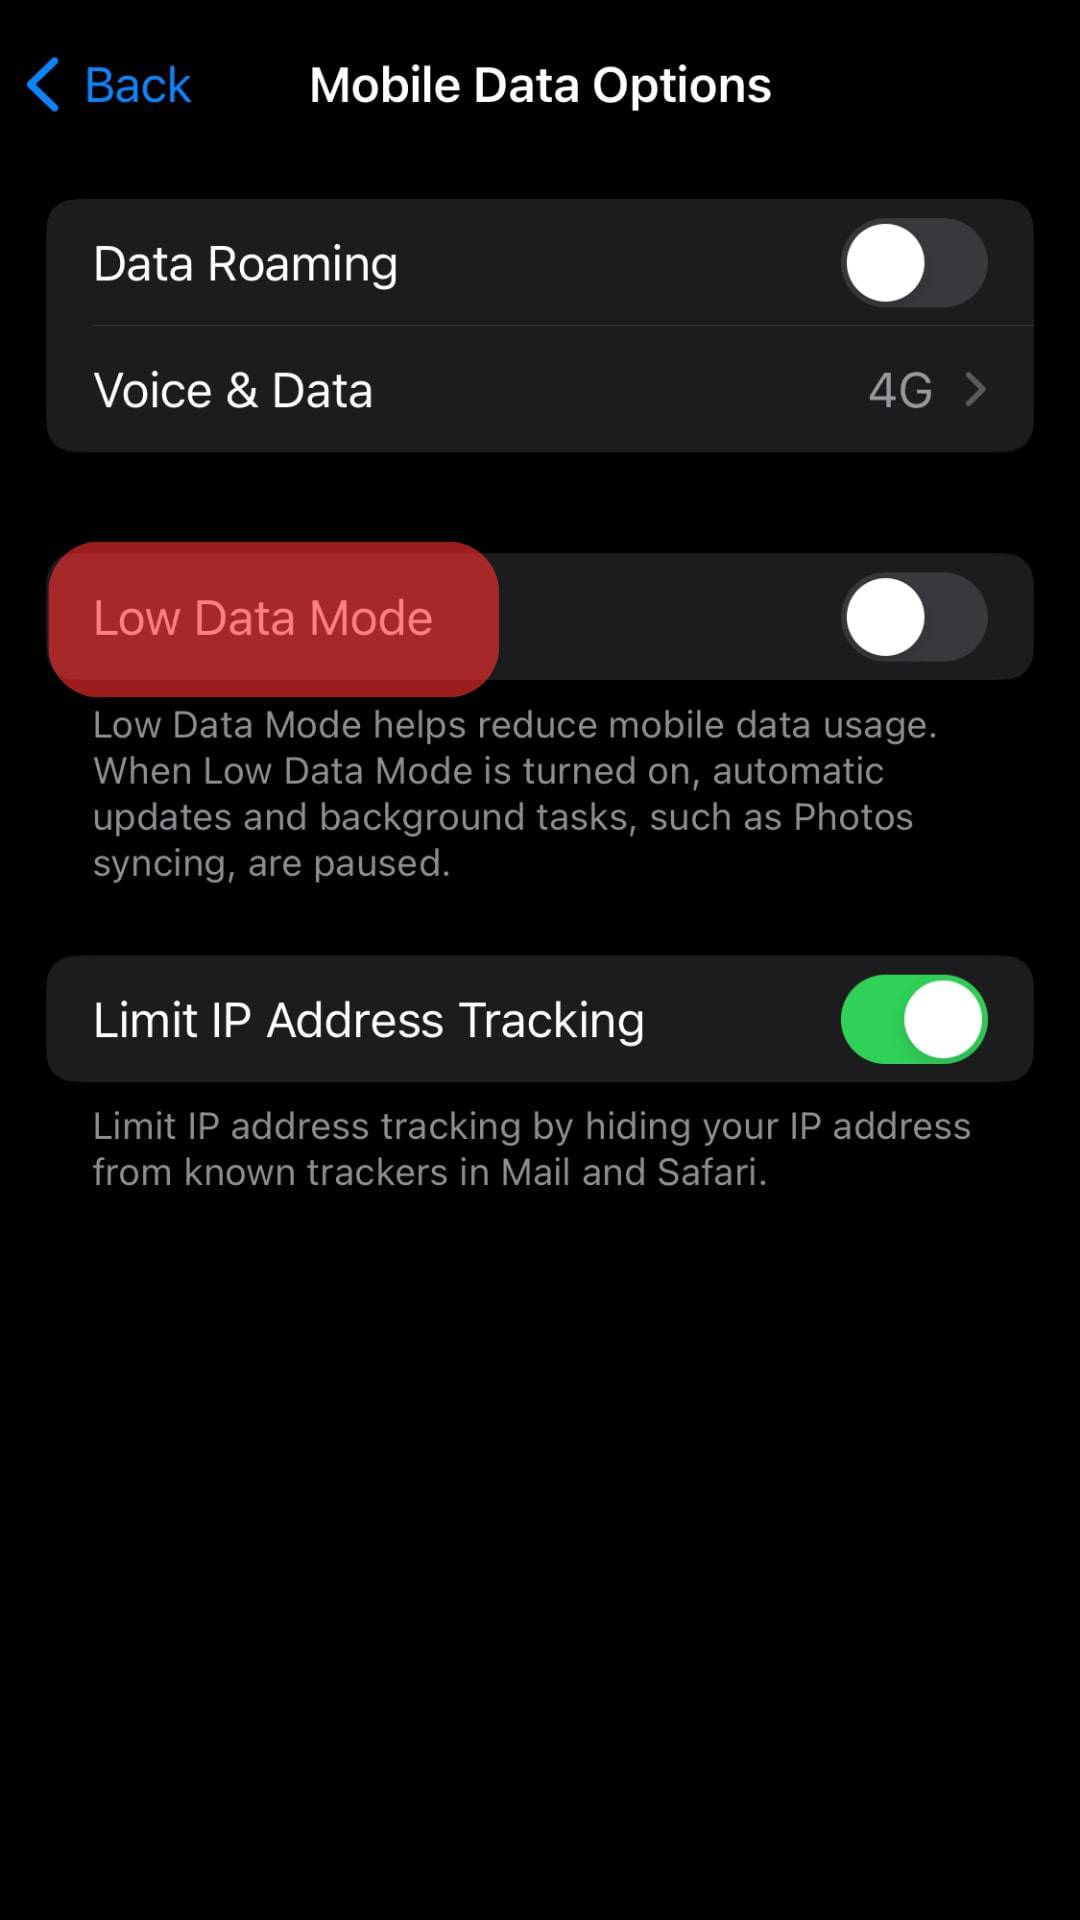 Select Low Data Mode.